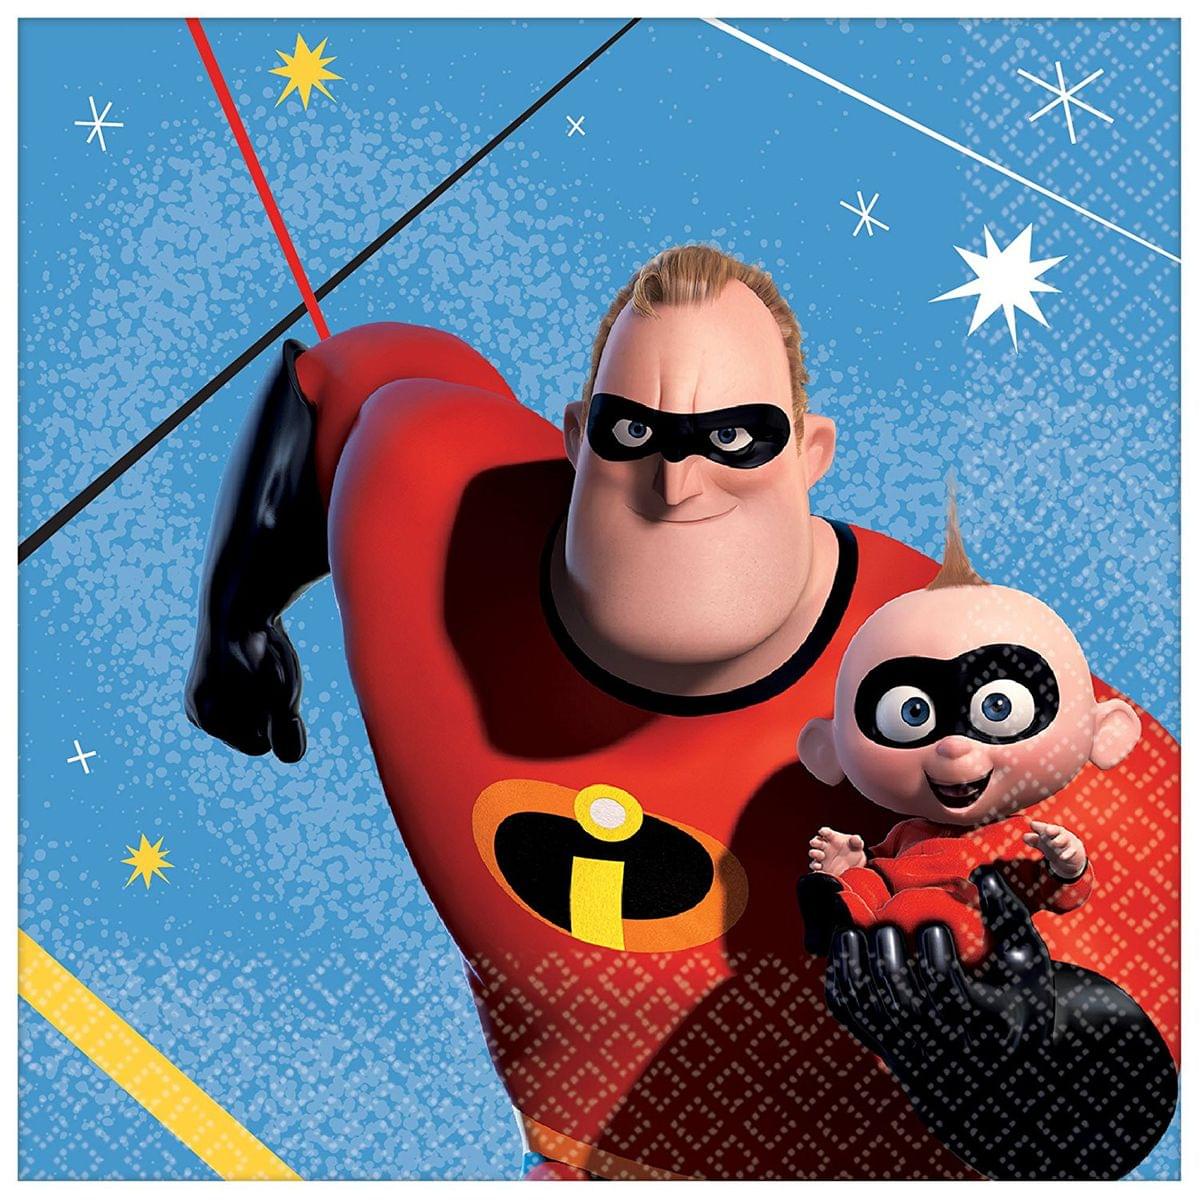 Incredibles 2 Party Bundle: 32x Napkins, 32x 7-9" Plates, 16x Cups, 2x Covers